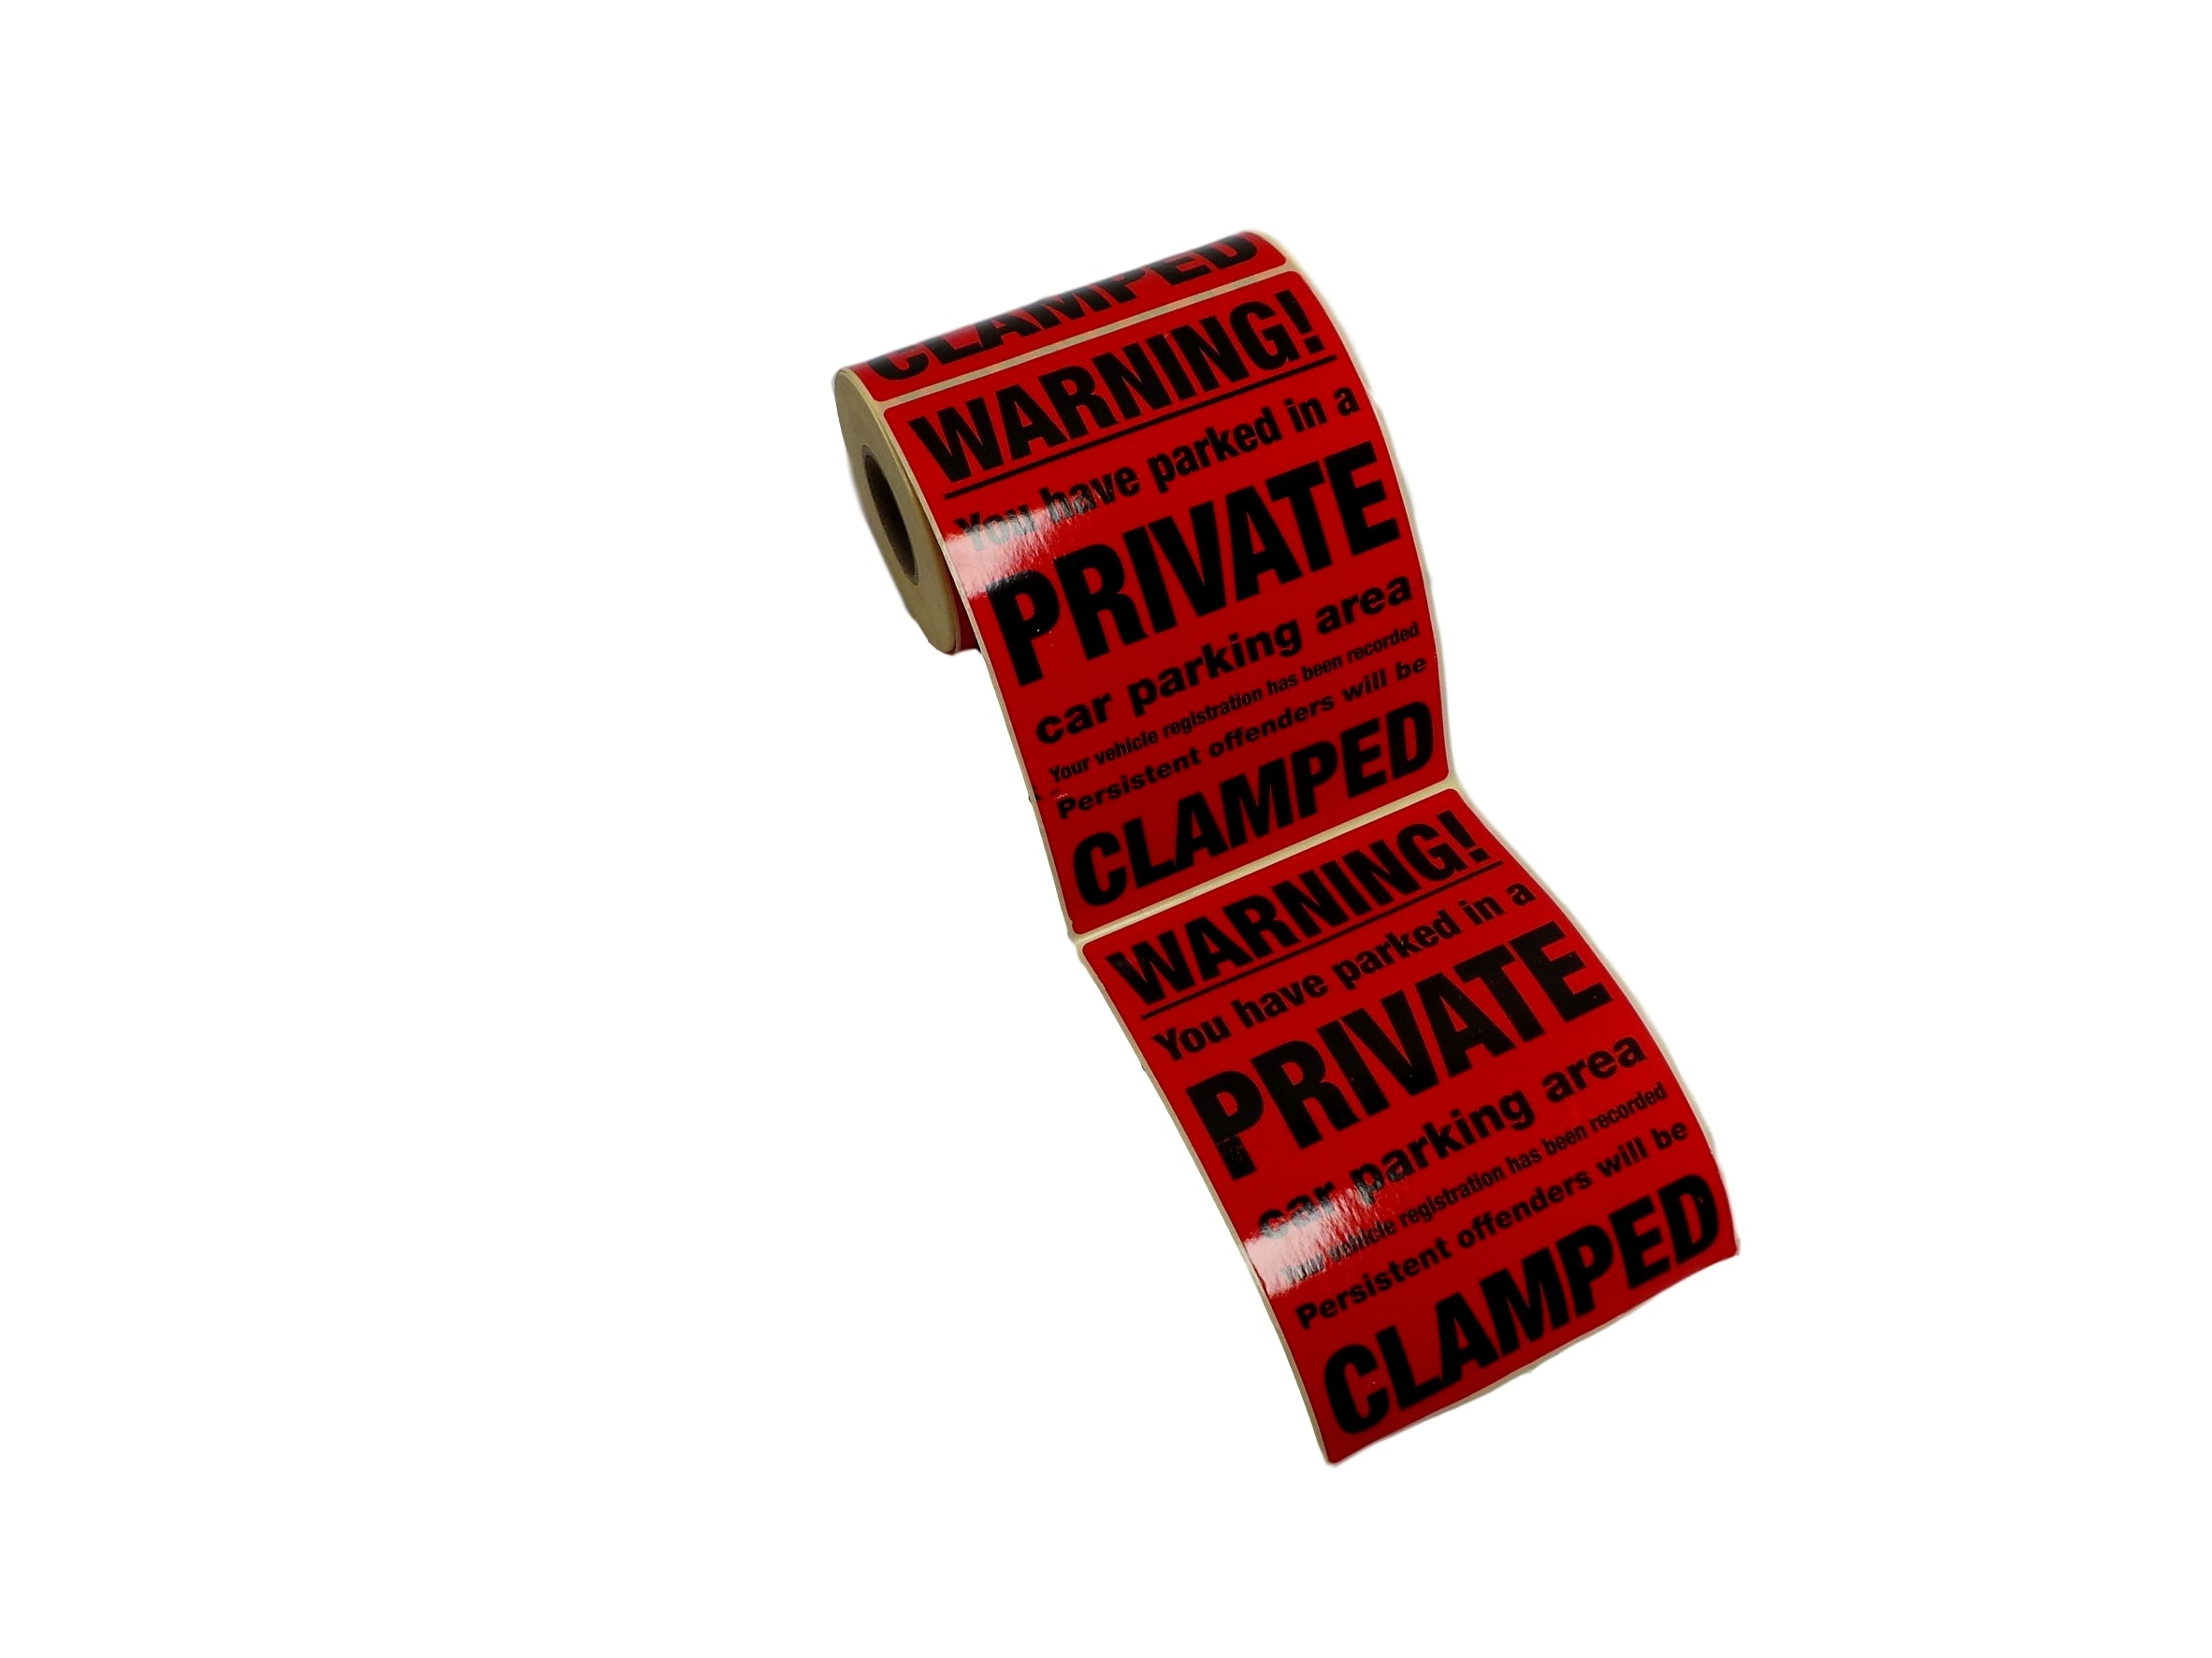 Private Car Parking Stickers